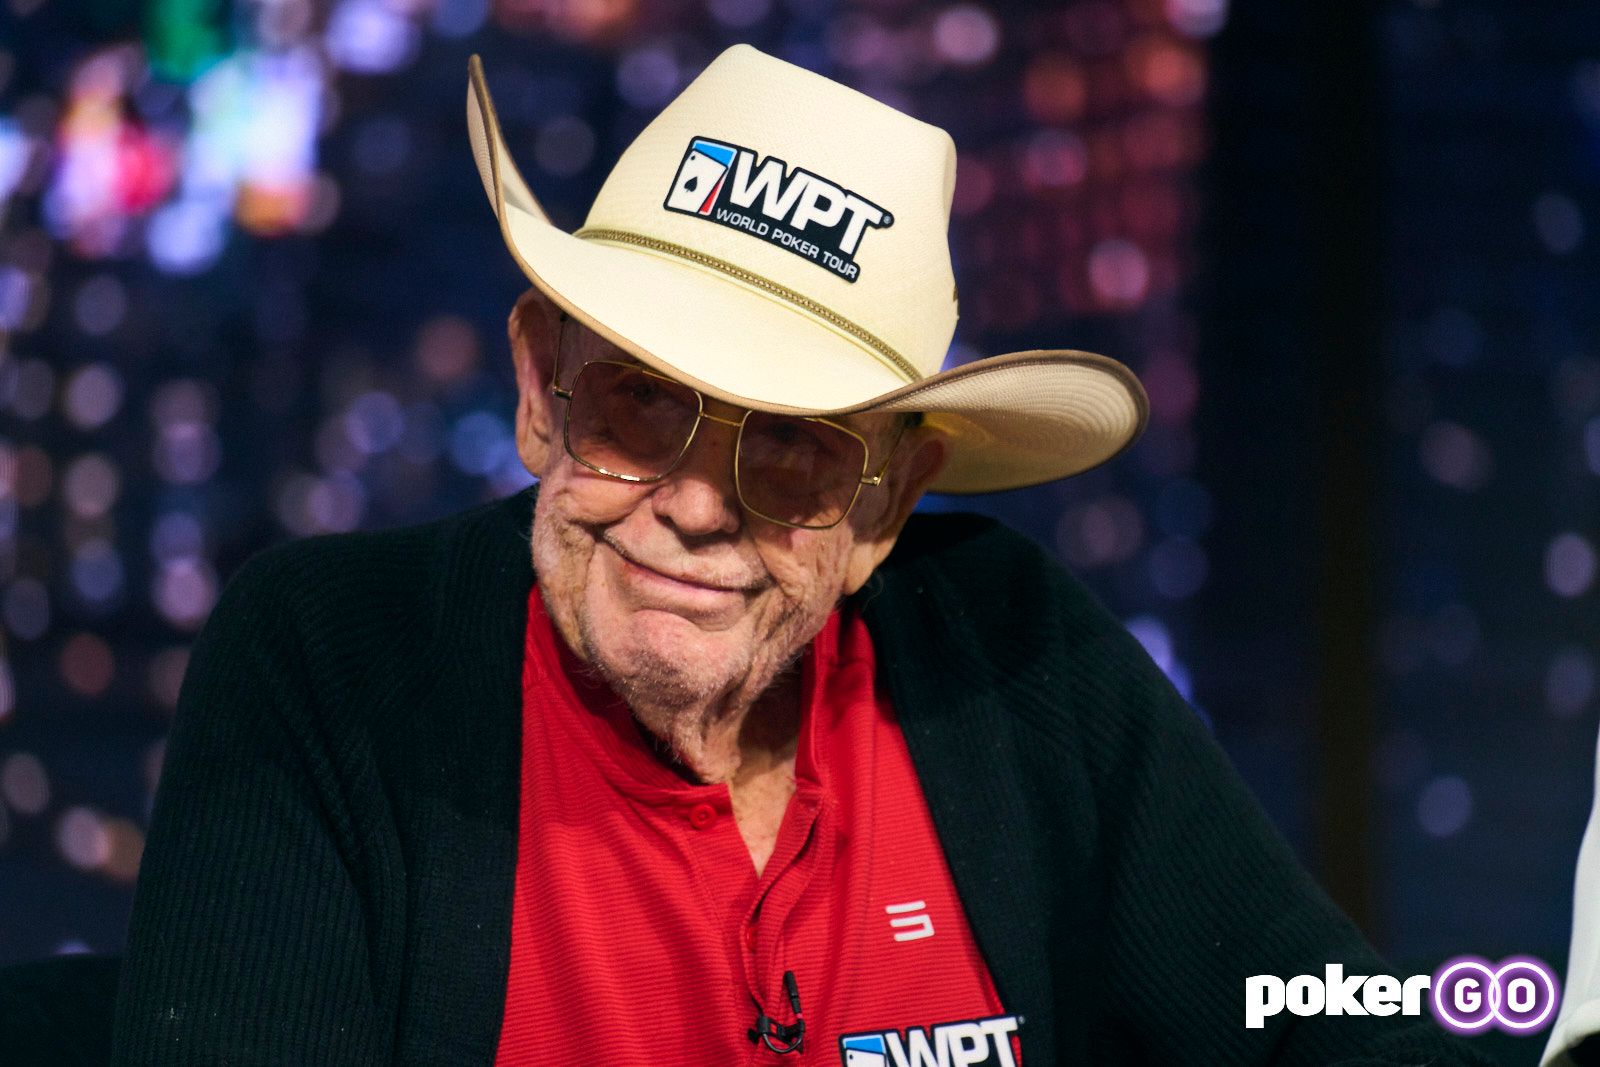 Doyle Brunson Shows the Youngsters How it’s Done on High Stakes Poker